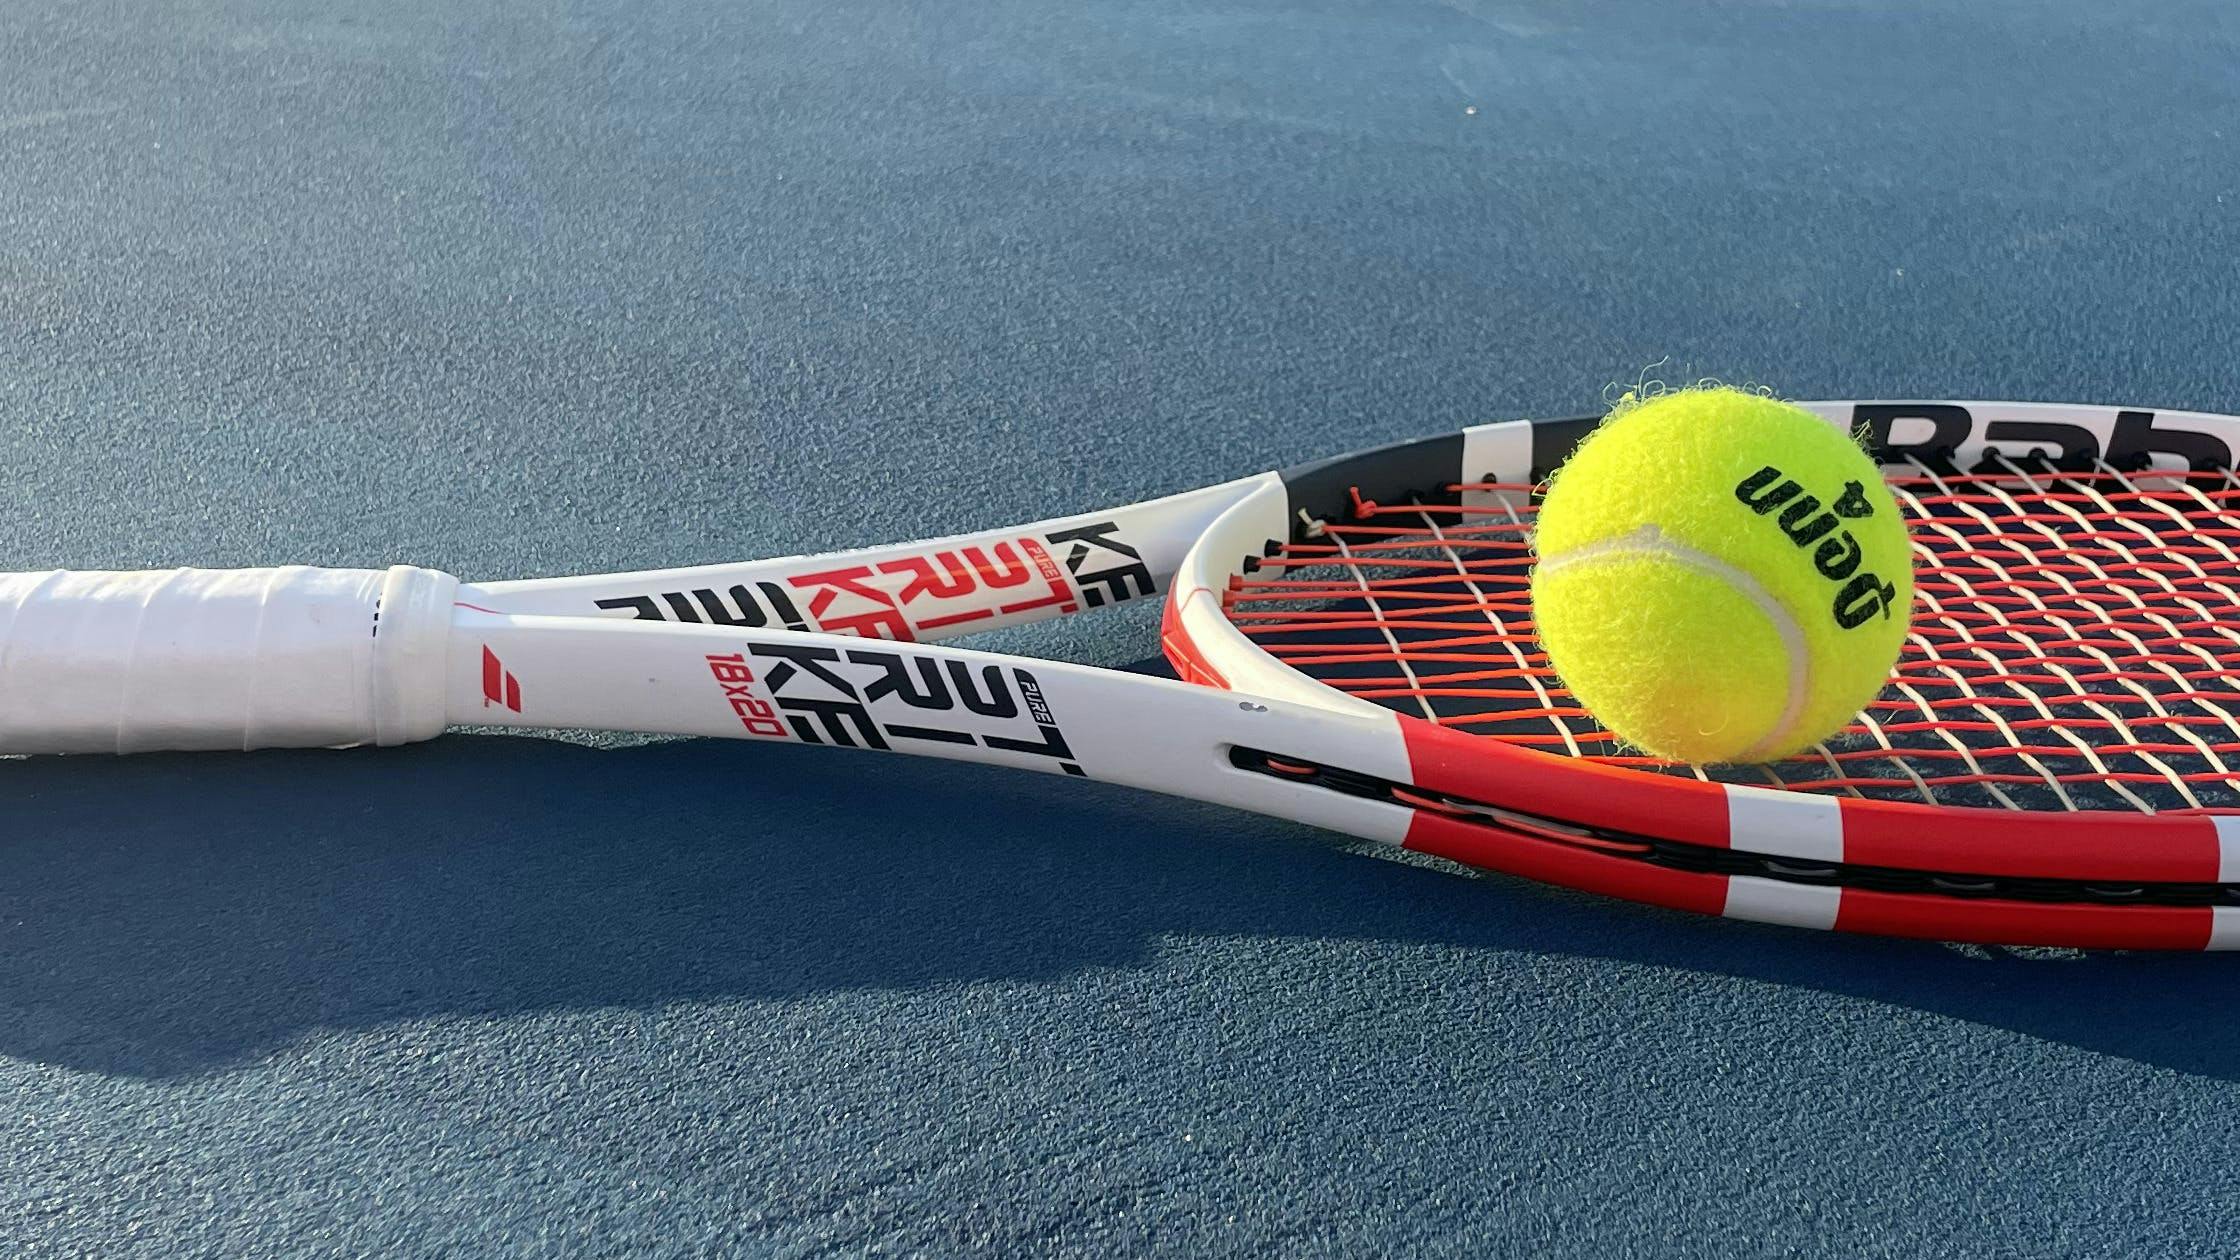 The Babolat Pure Strike 18x20 Racquet lying on a tennis court.